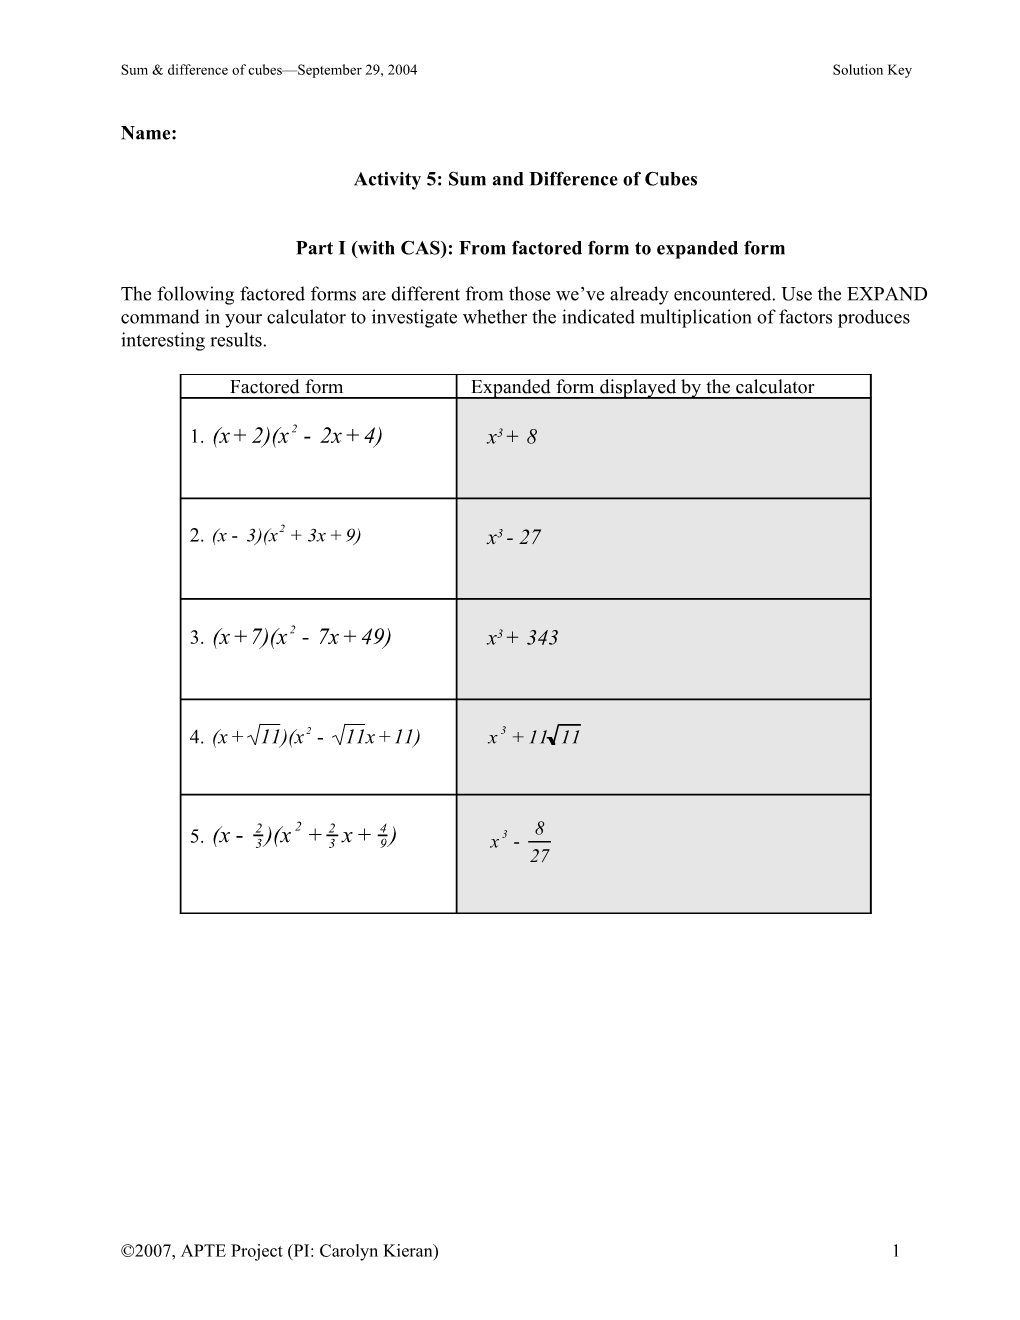 Activity 5: Sum and Difference of Cubes